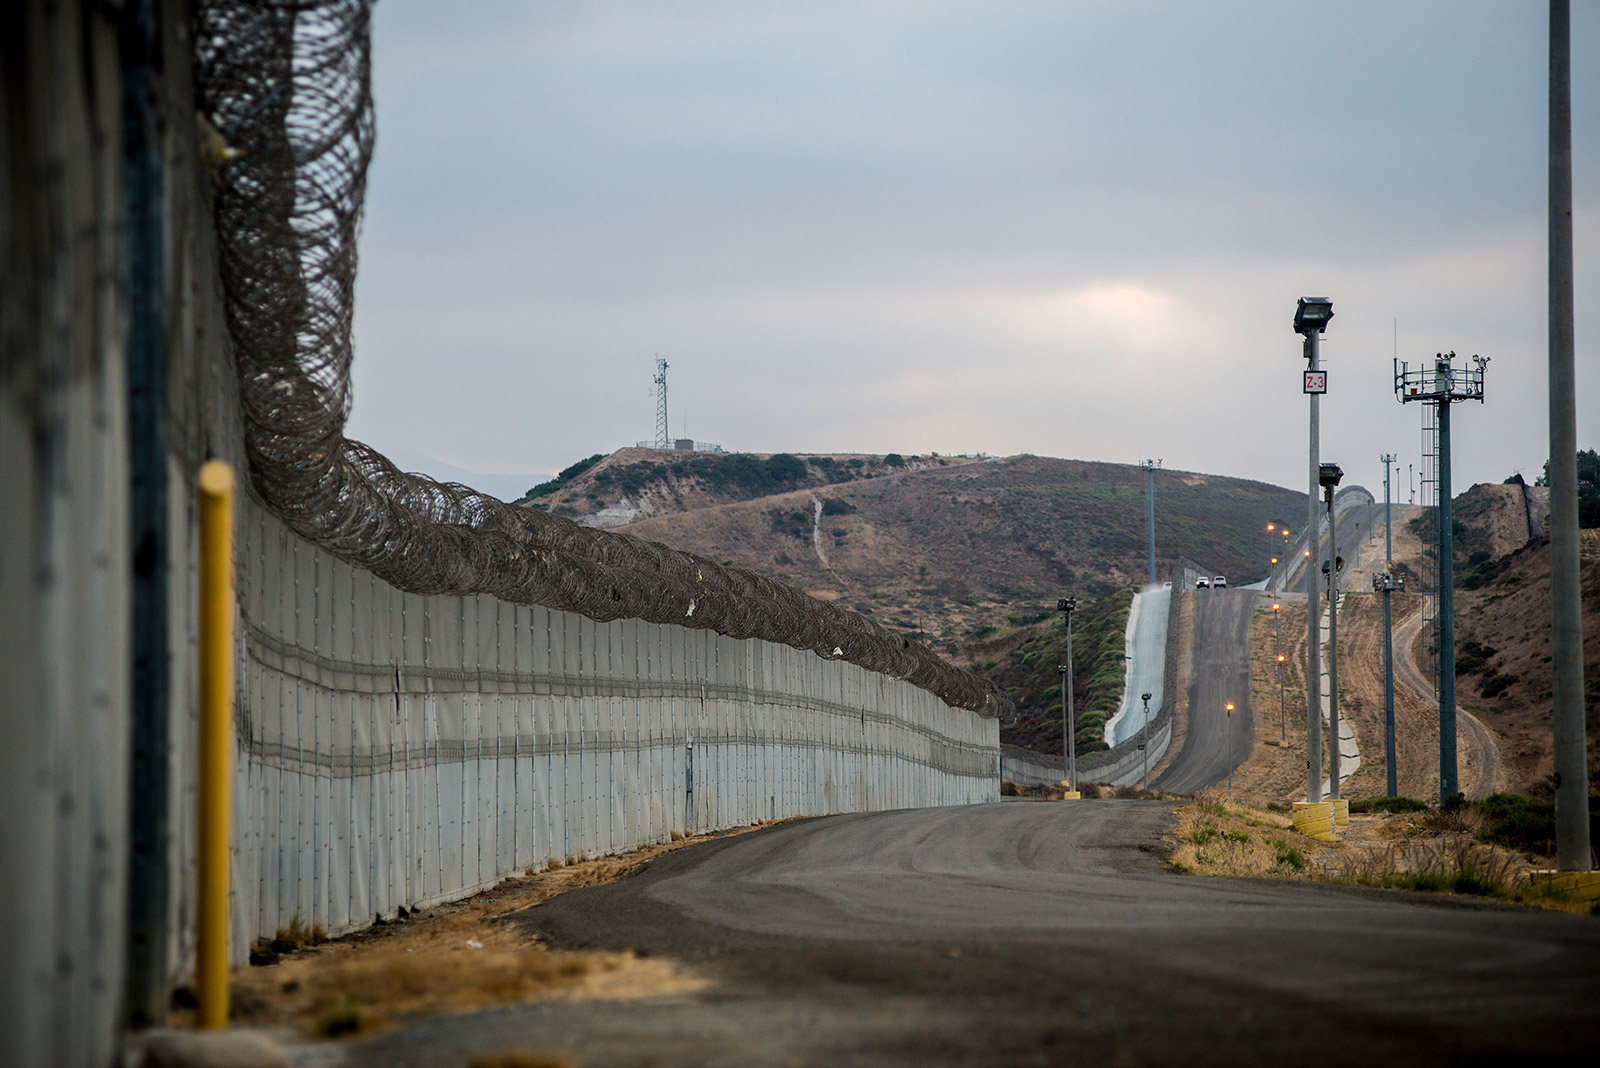 Stretches of secondary fencing are topped with spirals of concertina wire along the U.S.-Mexico border between the San Ysidro and Otay Mesa ports of entry, in San Diego on Aug. 16, 2017. Border Patrol agents use the frontage road between this and primary fencing to patrol for immigrants attempting to enter the U.S. illegally. <em>(Brandon Quester/inewsource)</em>